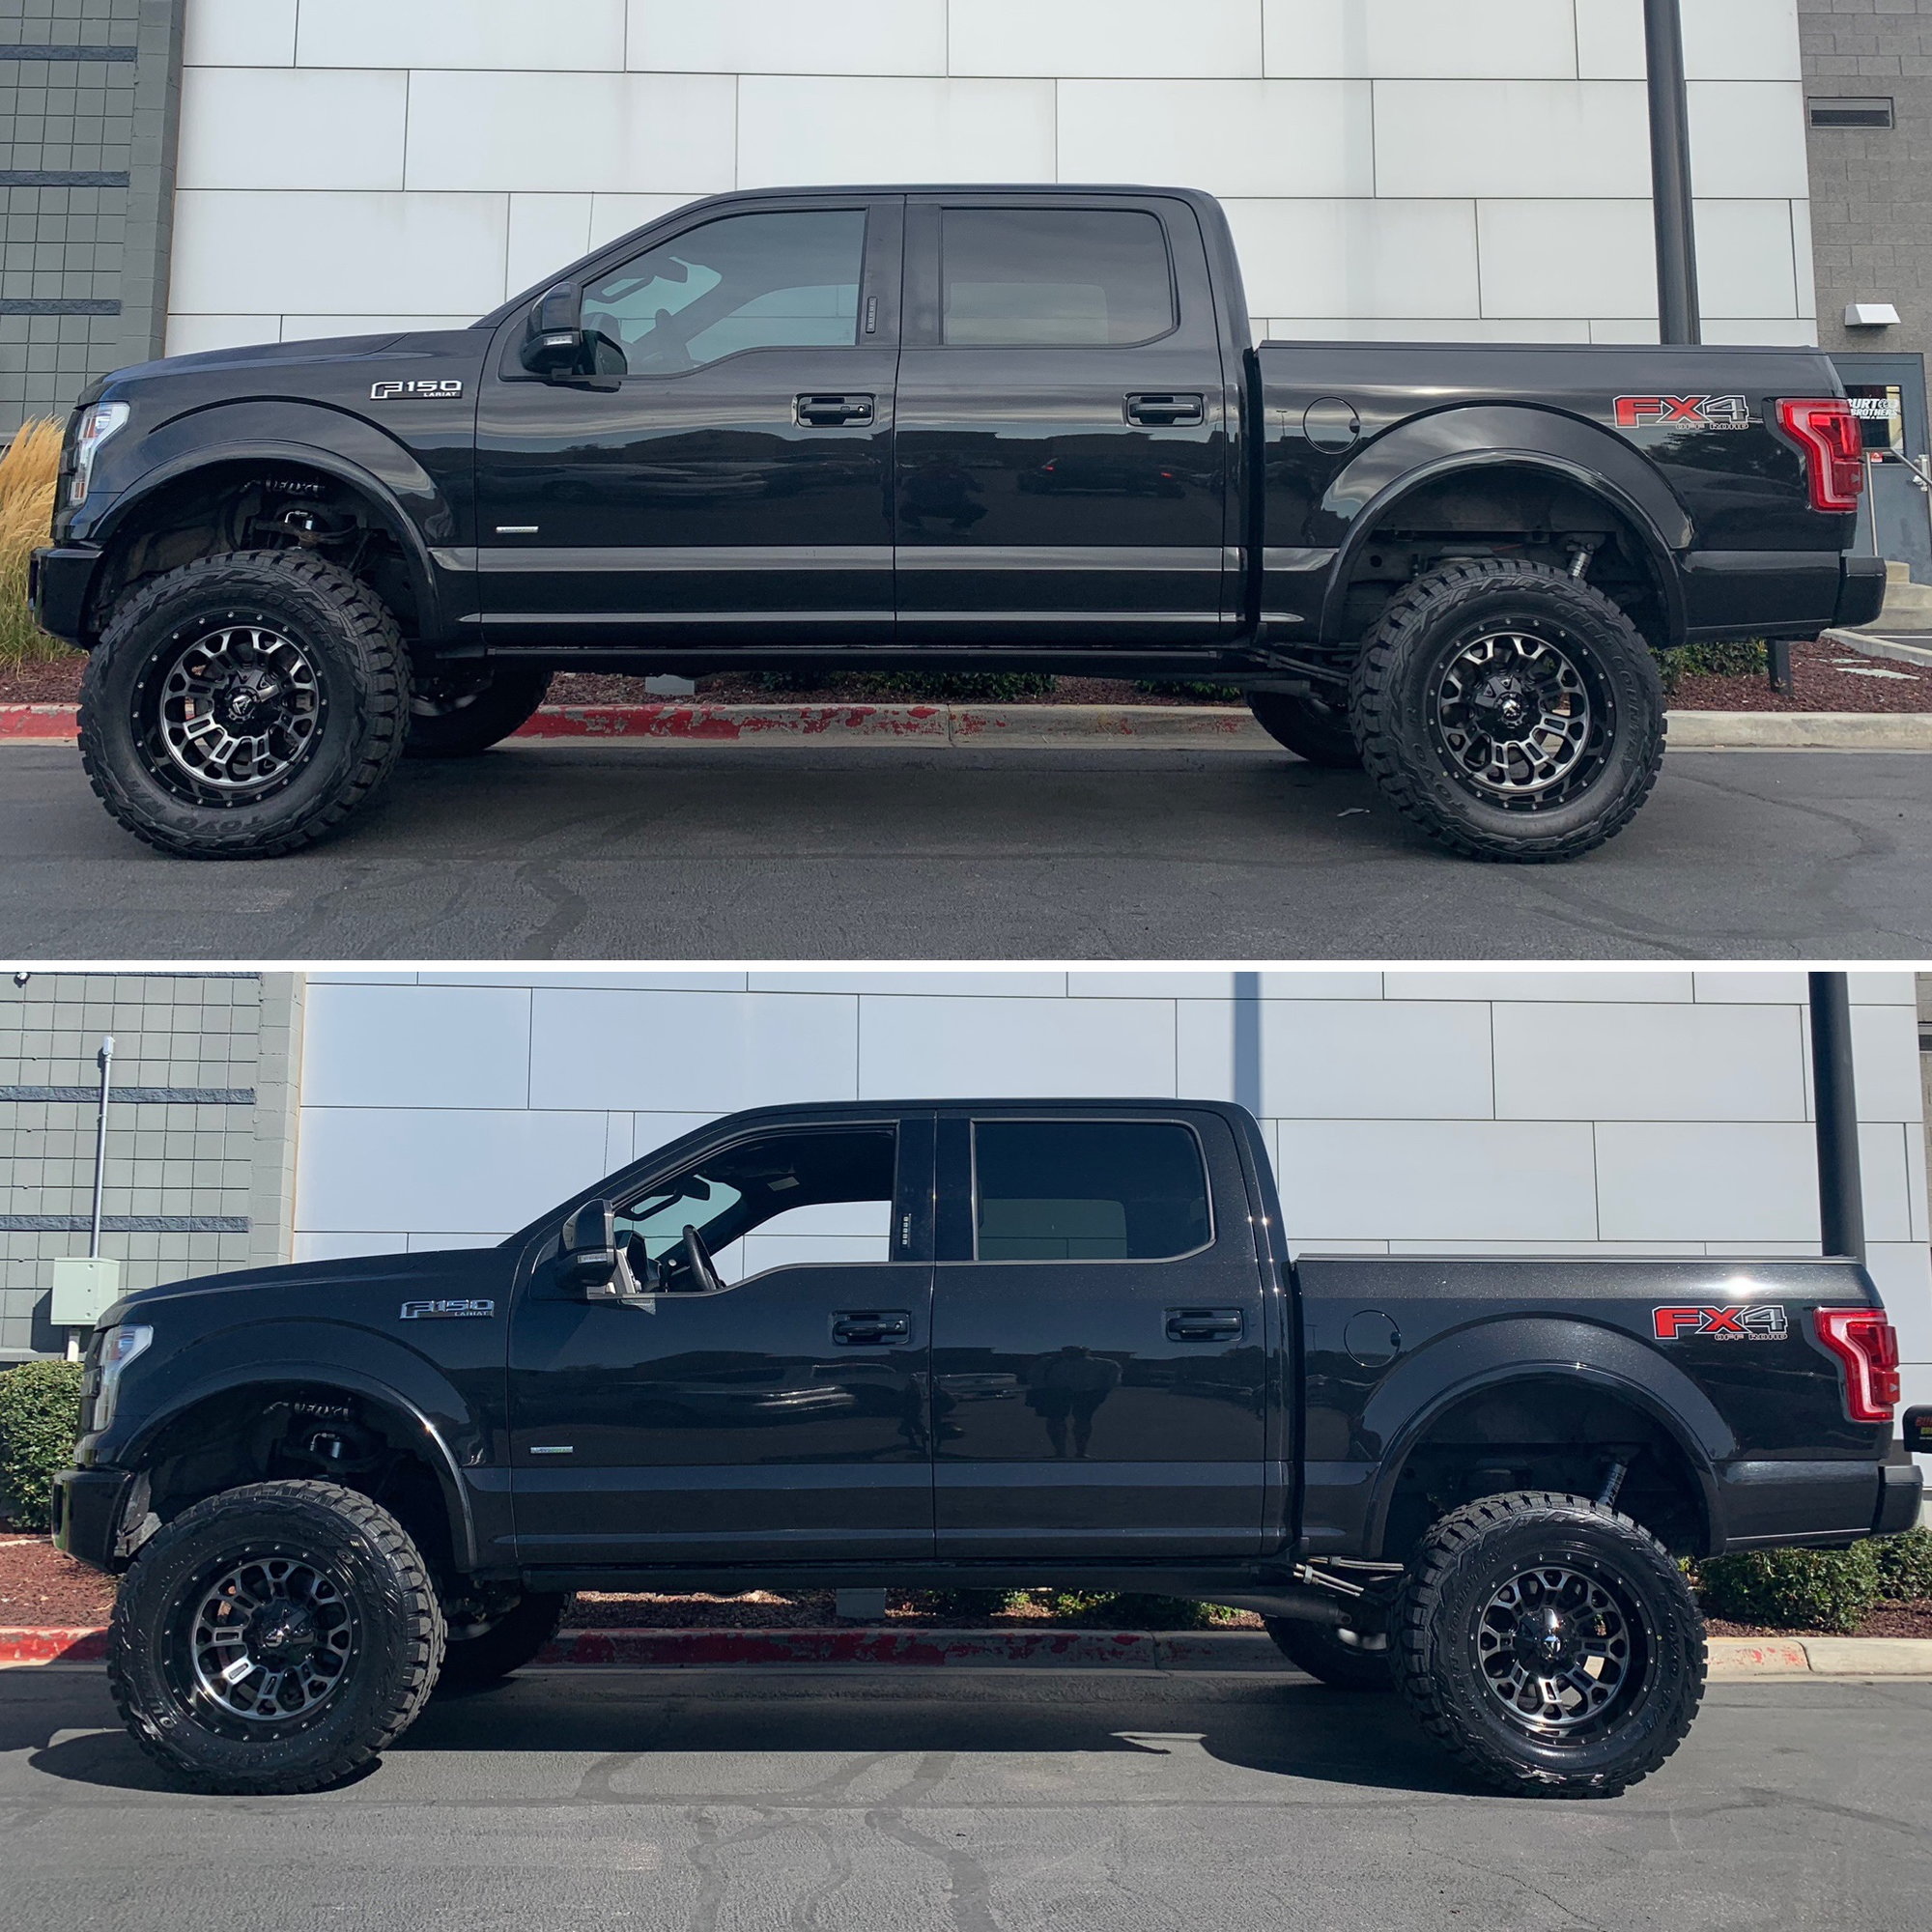 Difference between BDS 6” and 4” lift kits? - Page 2 - Ford F150 Forum 4 Inch Lift Vs 6 Inch Lift